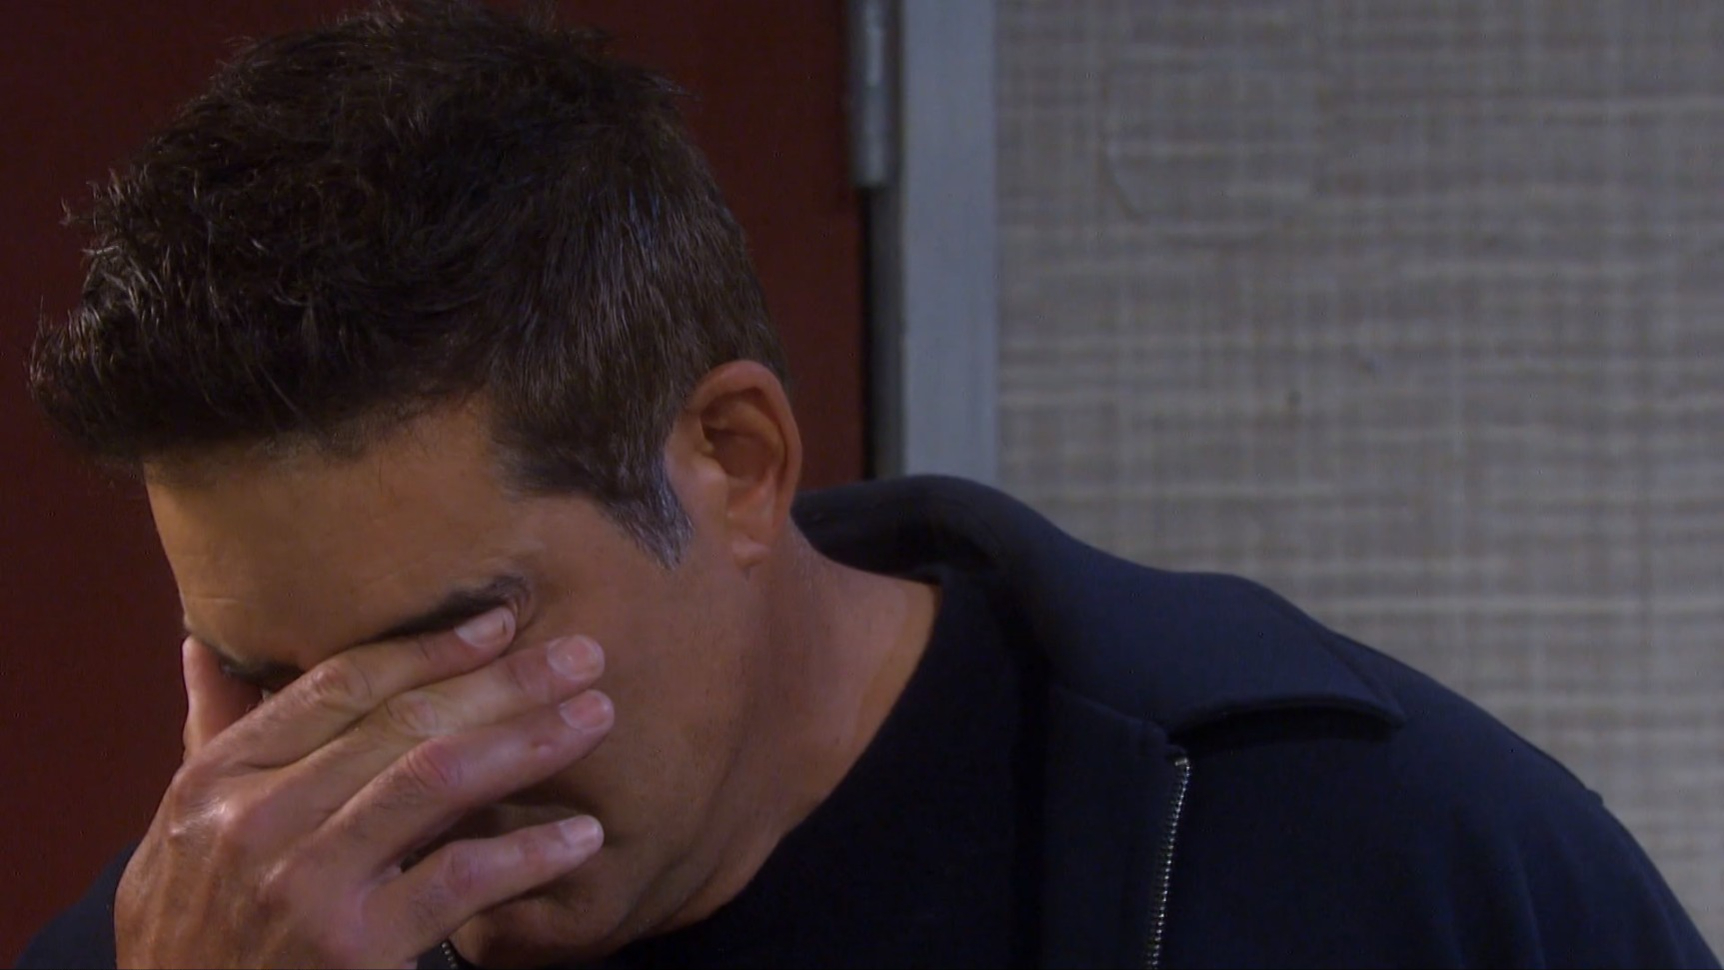 rafe hurting on days of our lives soapsspoilers recap